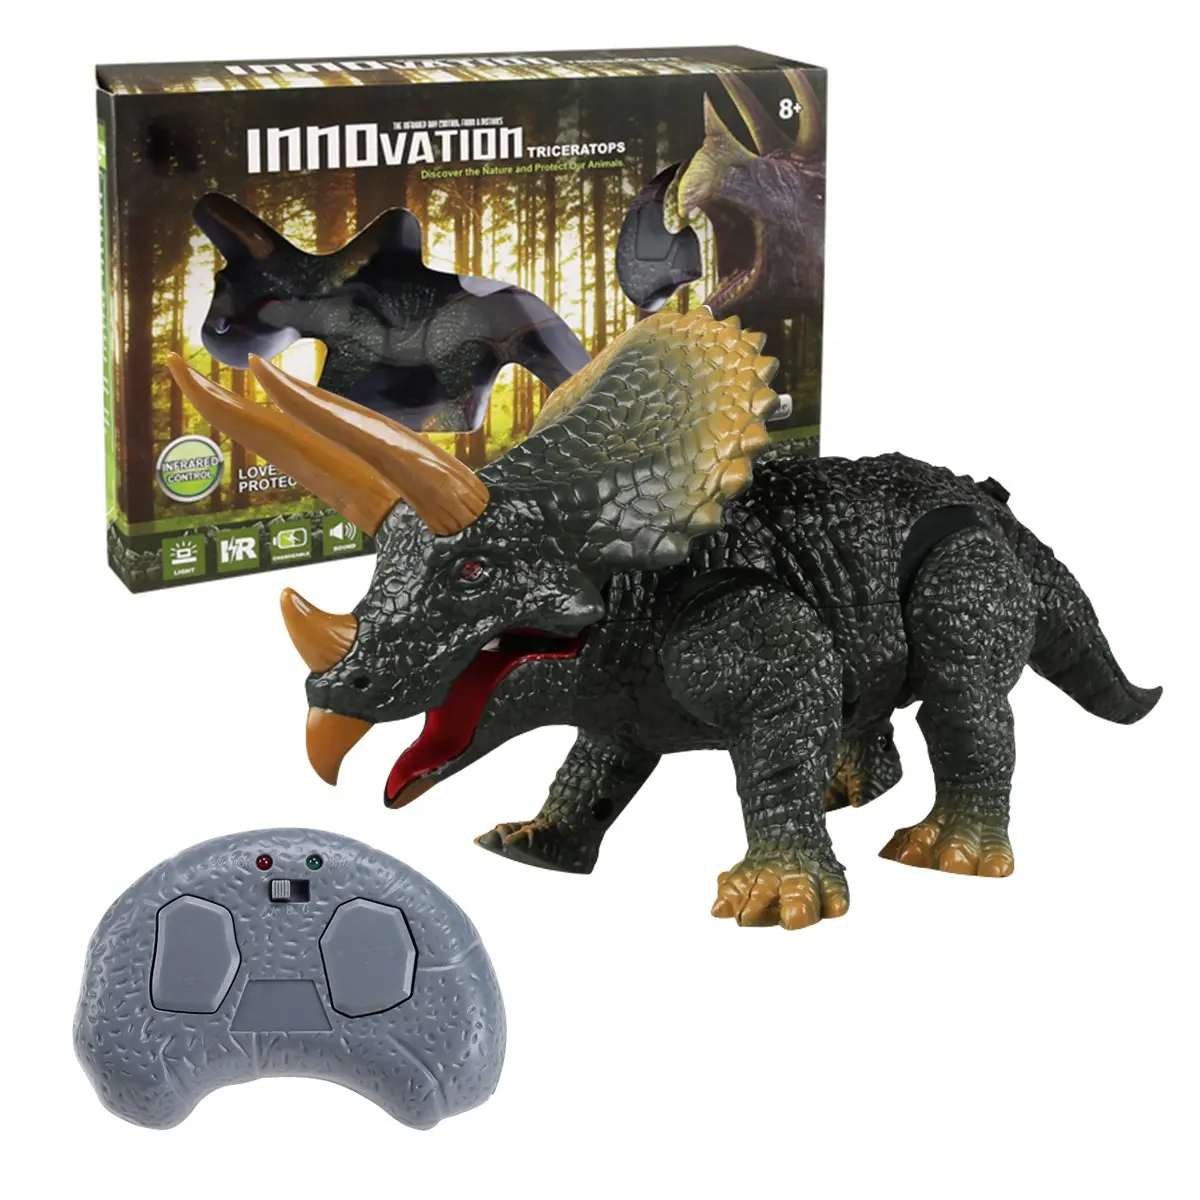 Light Up Remote Control Dinosaur Walking and Roaring Realistic Dinosaur with Glowing Eyes Walking Movement Rc Dinosaur Toy B1A